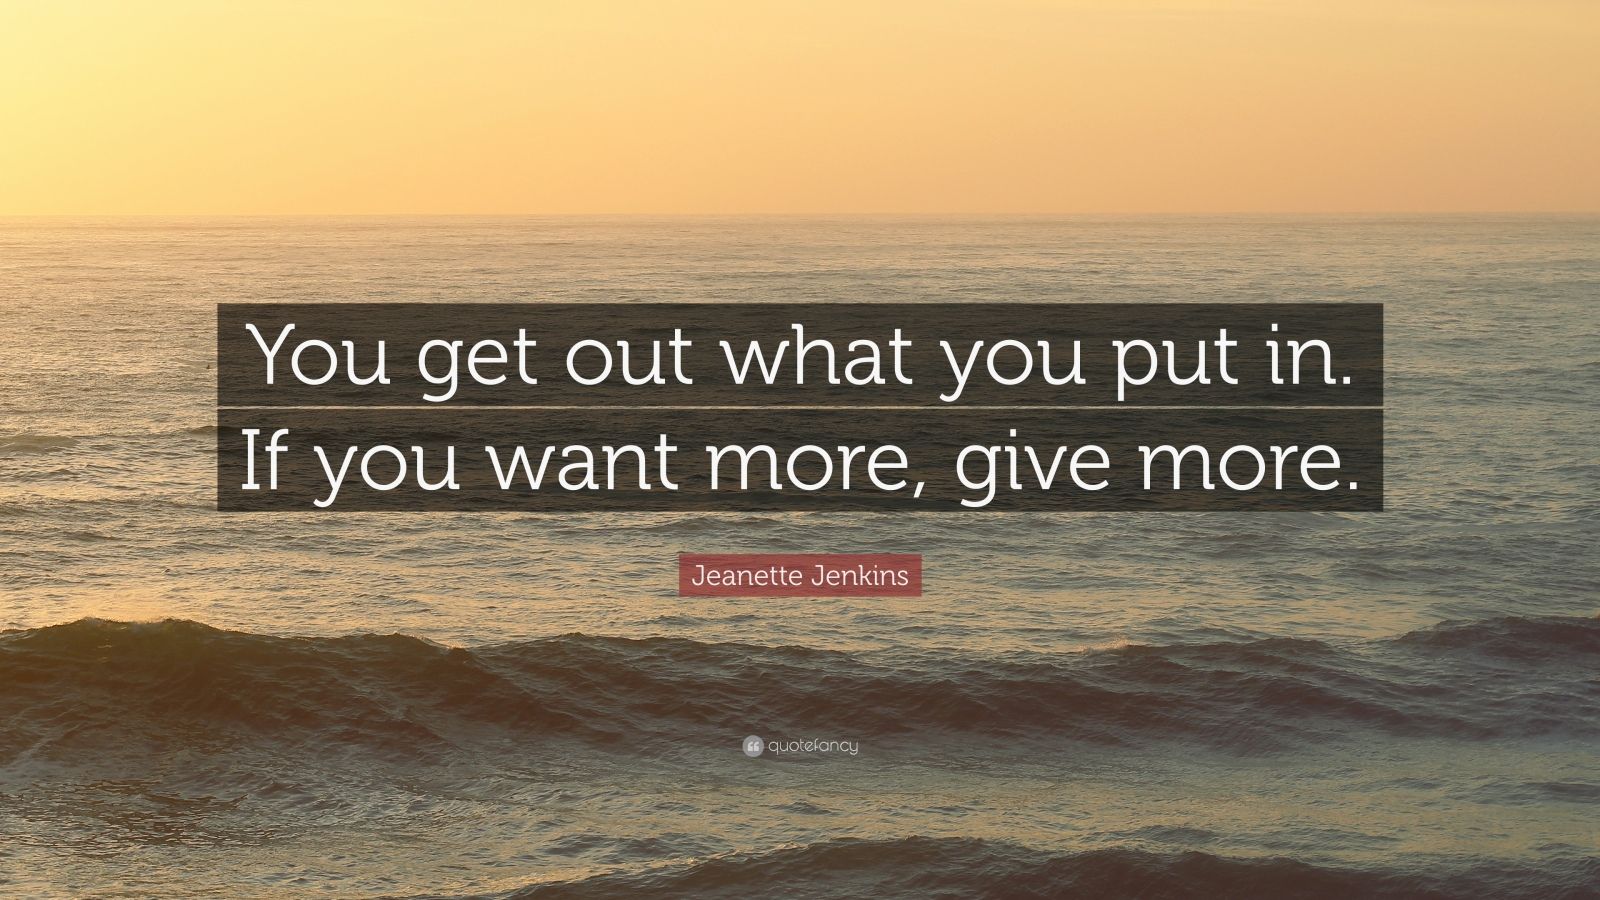 You get out what you put in. If you want more, give more.